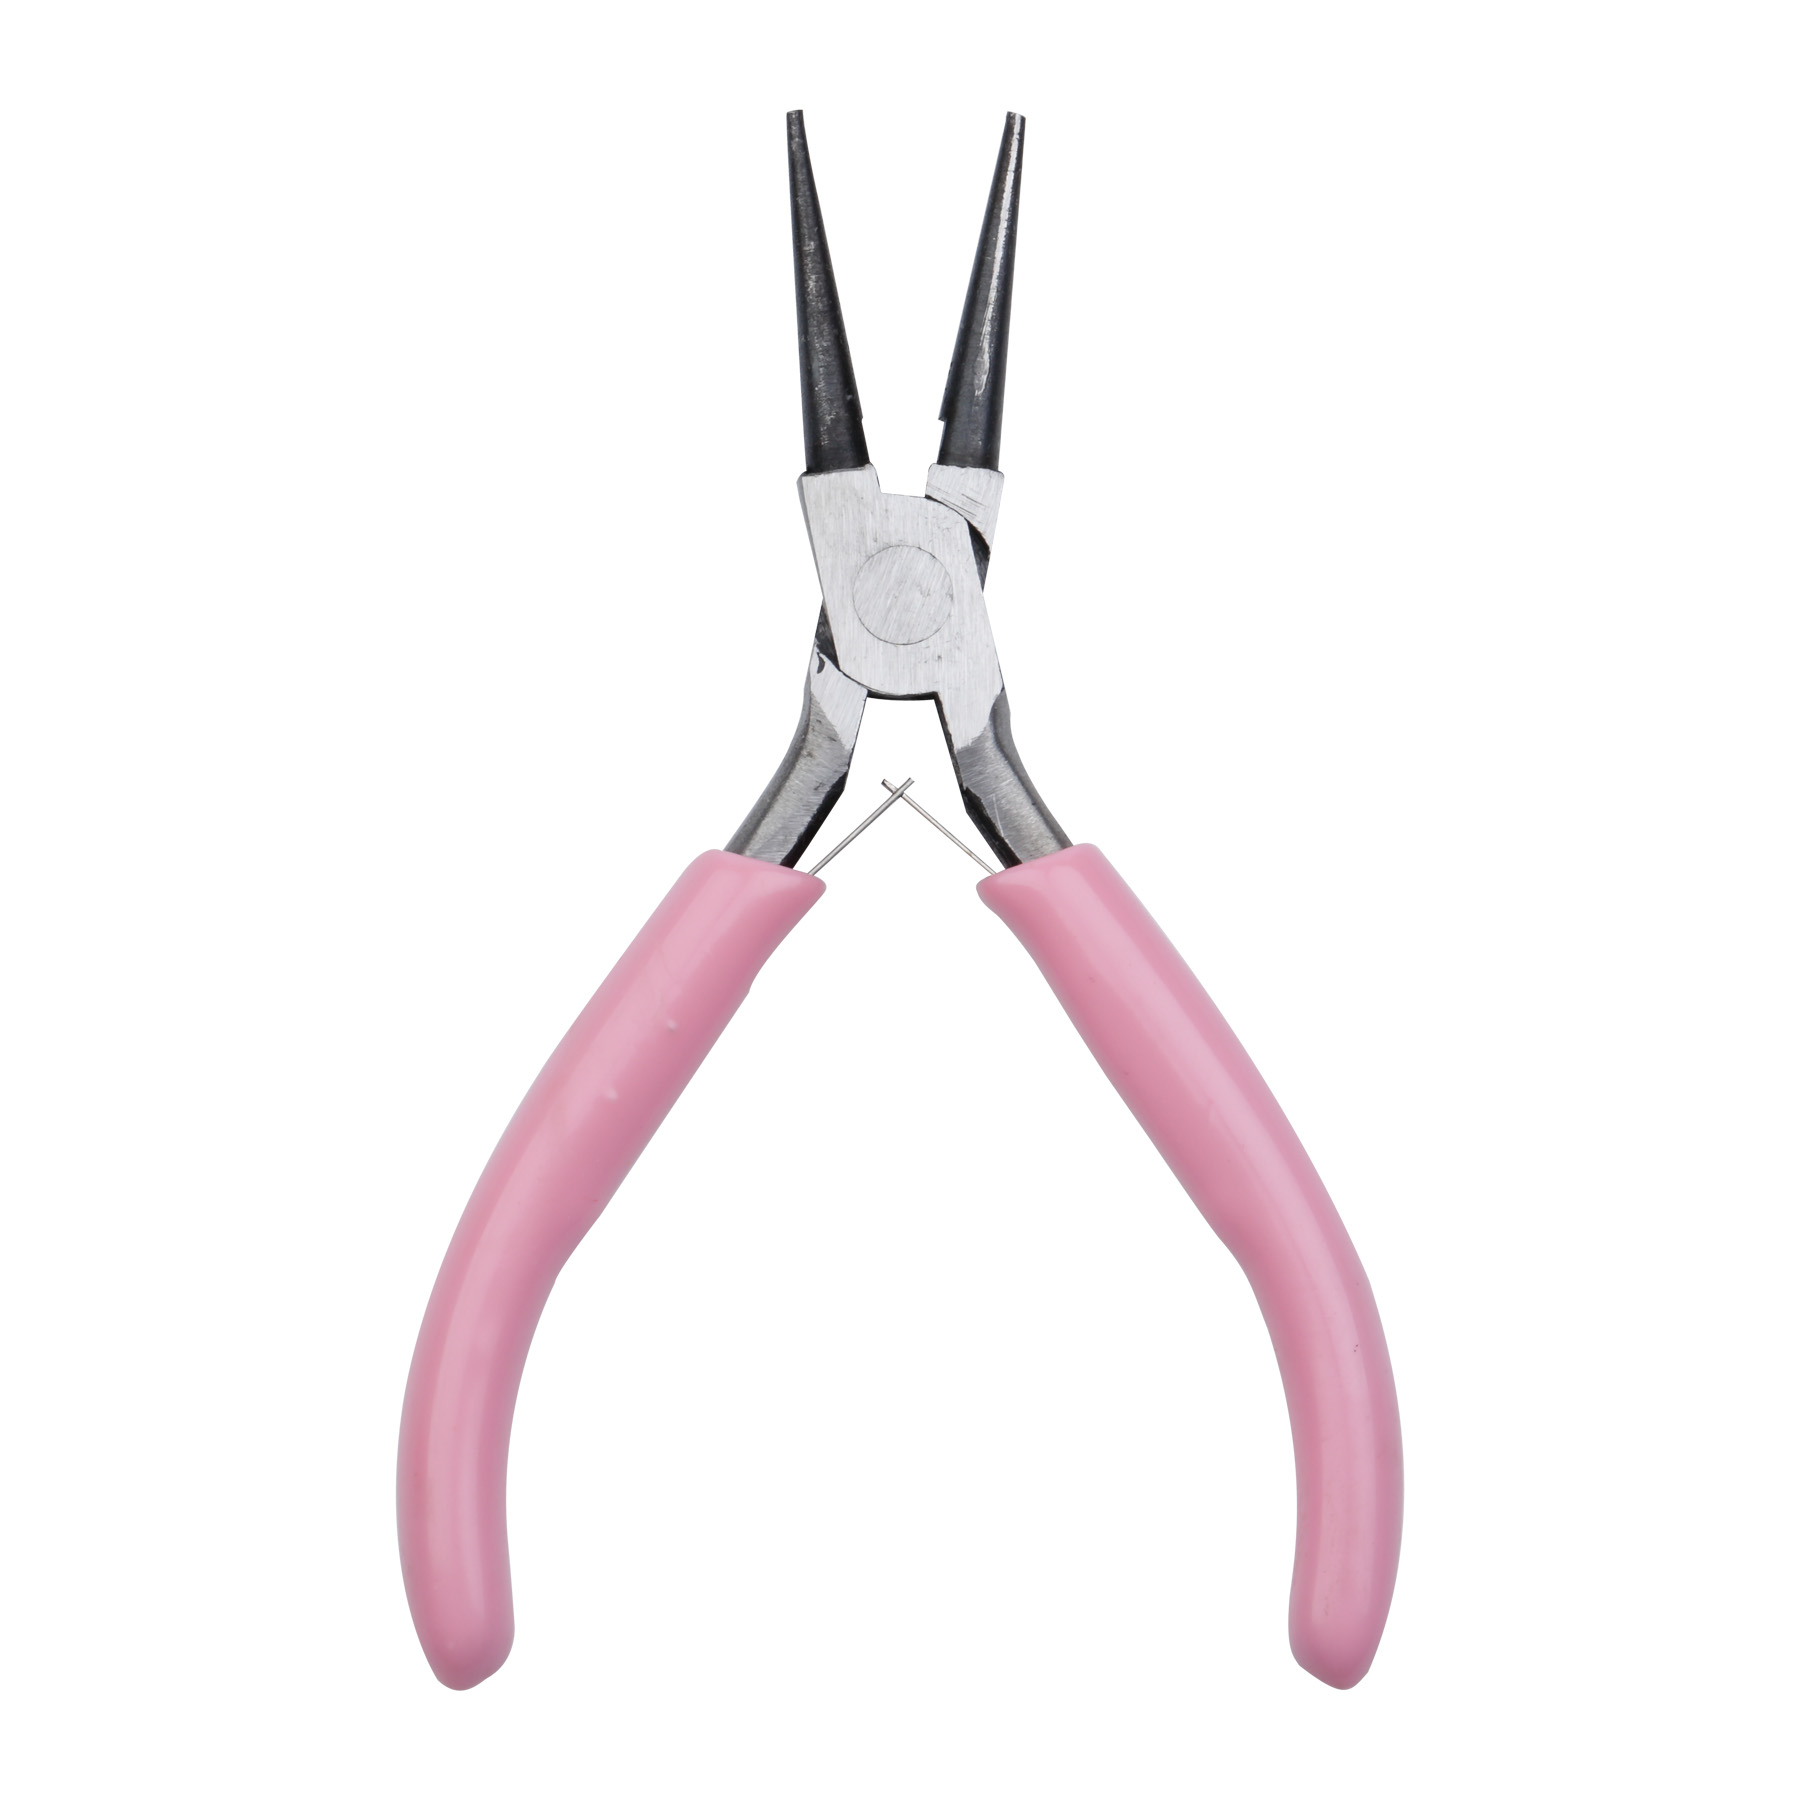 125mm Jewelry Tools DIY Accessories Hardware Tools Plastic Caliper pink vise black Round Head Sharp Mouth Wire Cutting Pliers